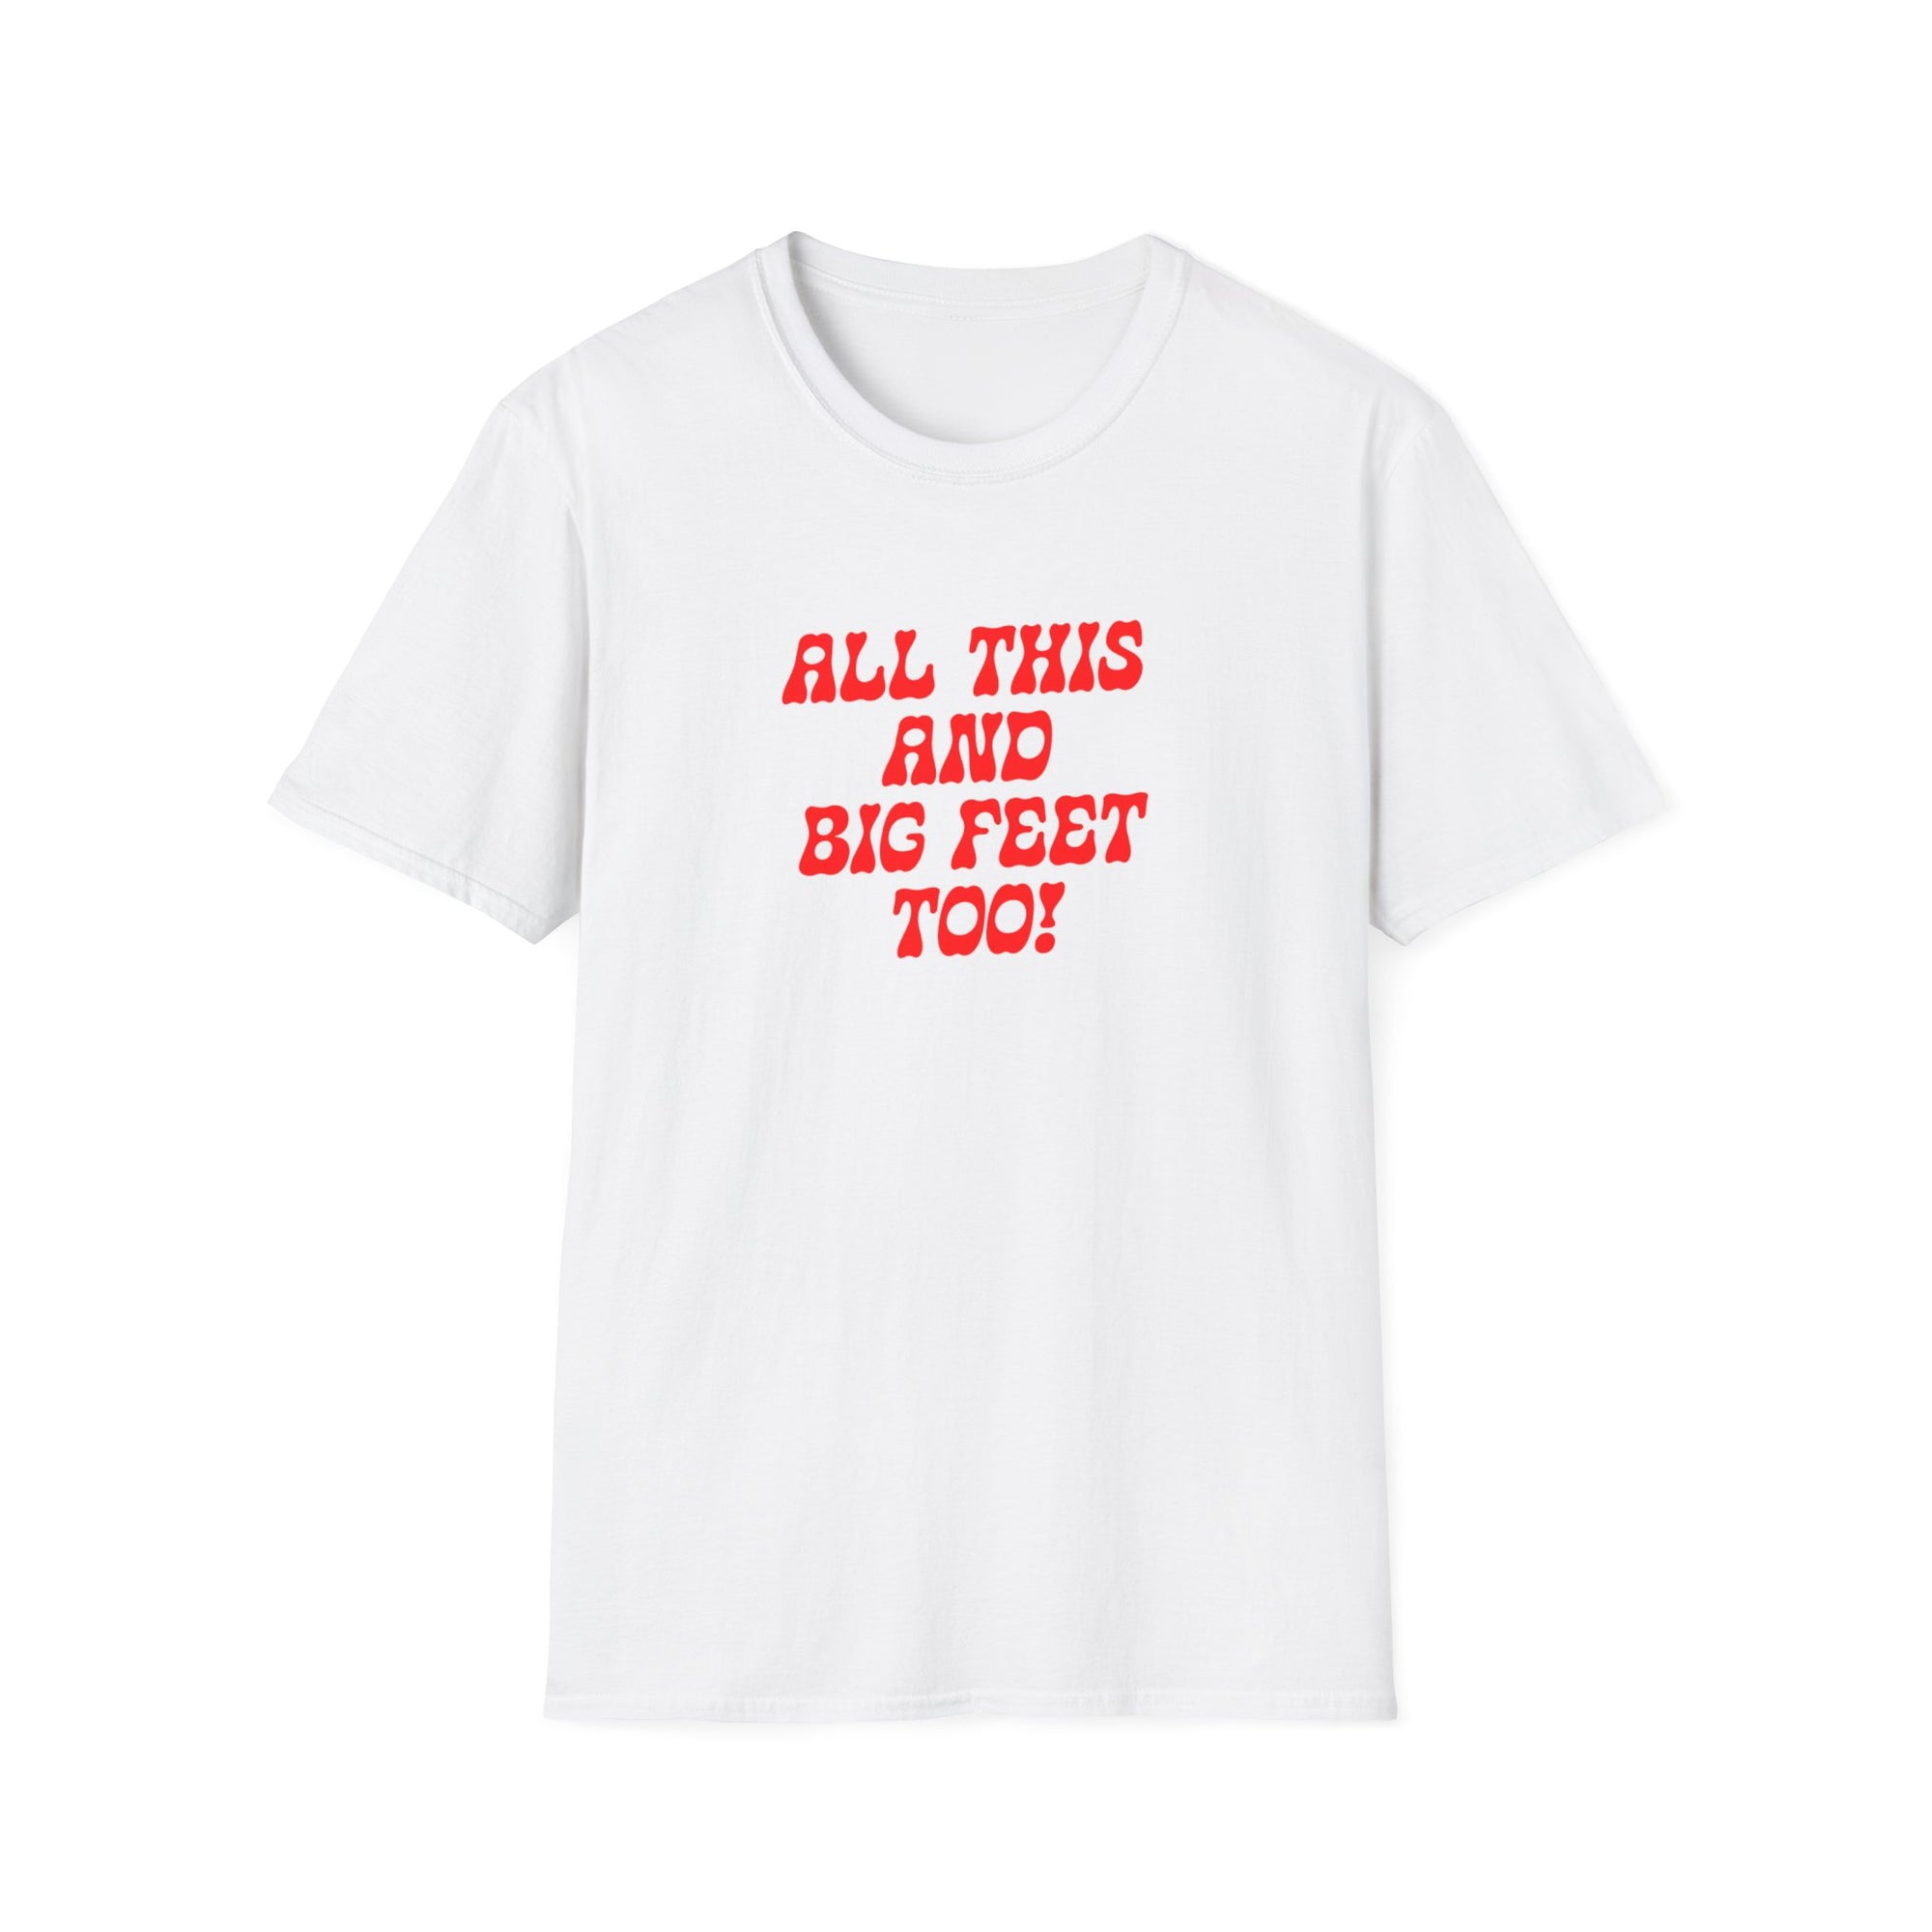 ALL THIS AND BIG FEET TOO - Unisex Shirt